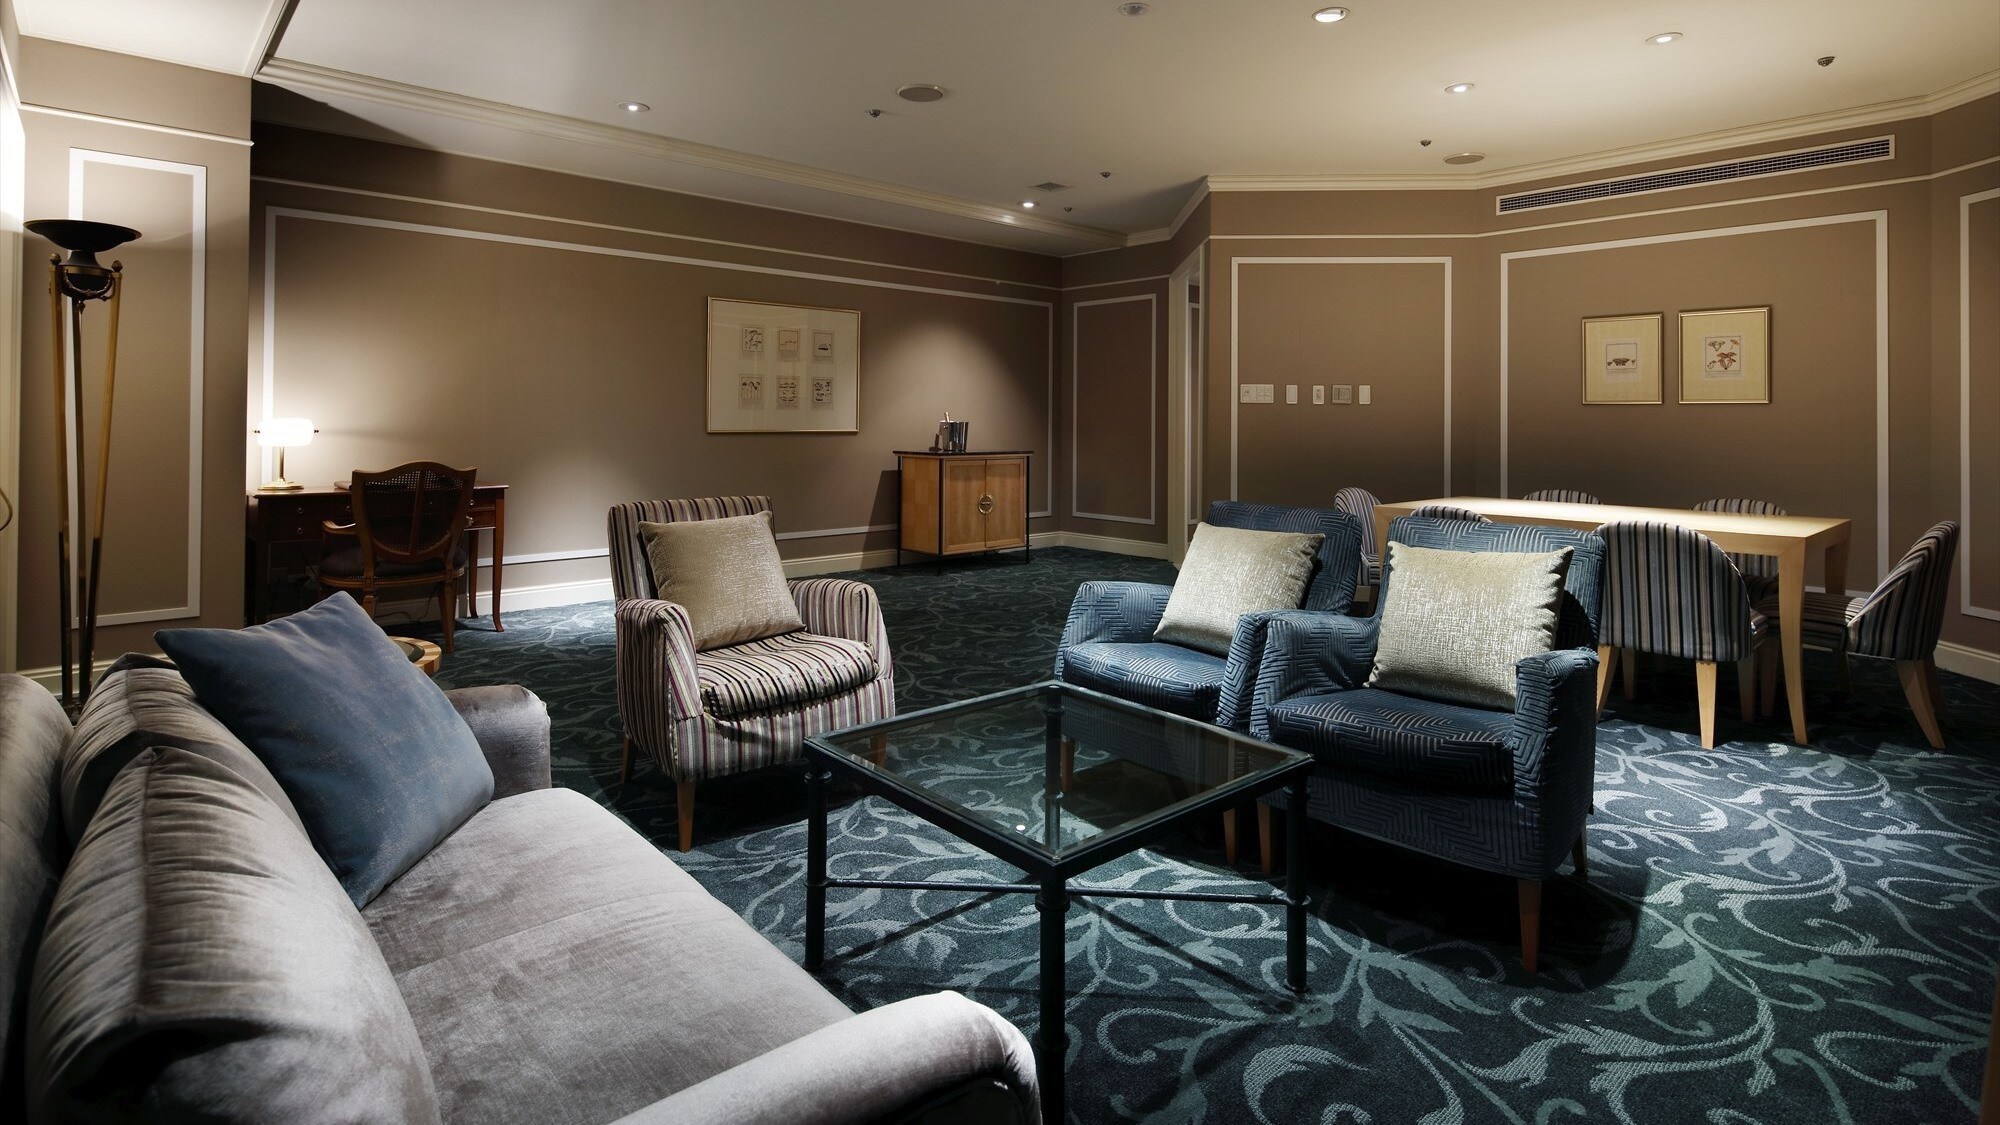 ◆Junior Suite Double｜Enjoy a relaxing time on a high-quality sofa.